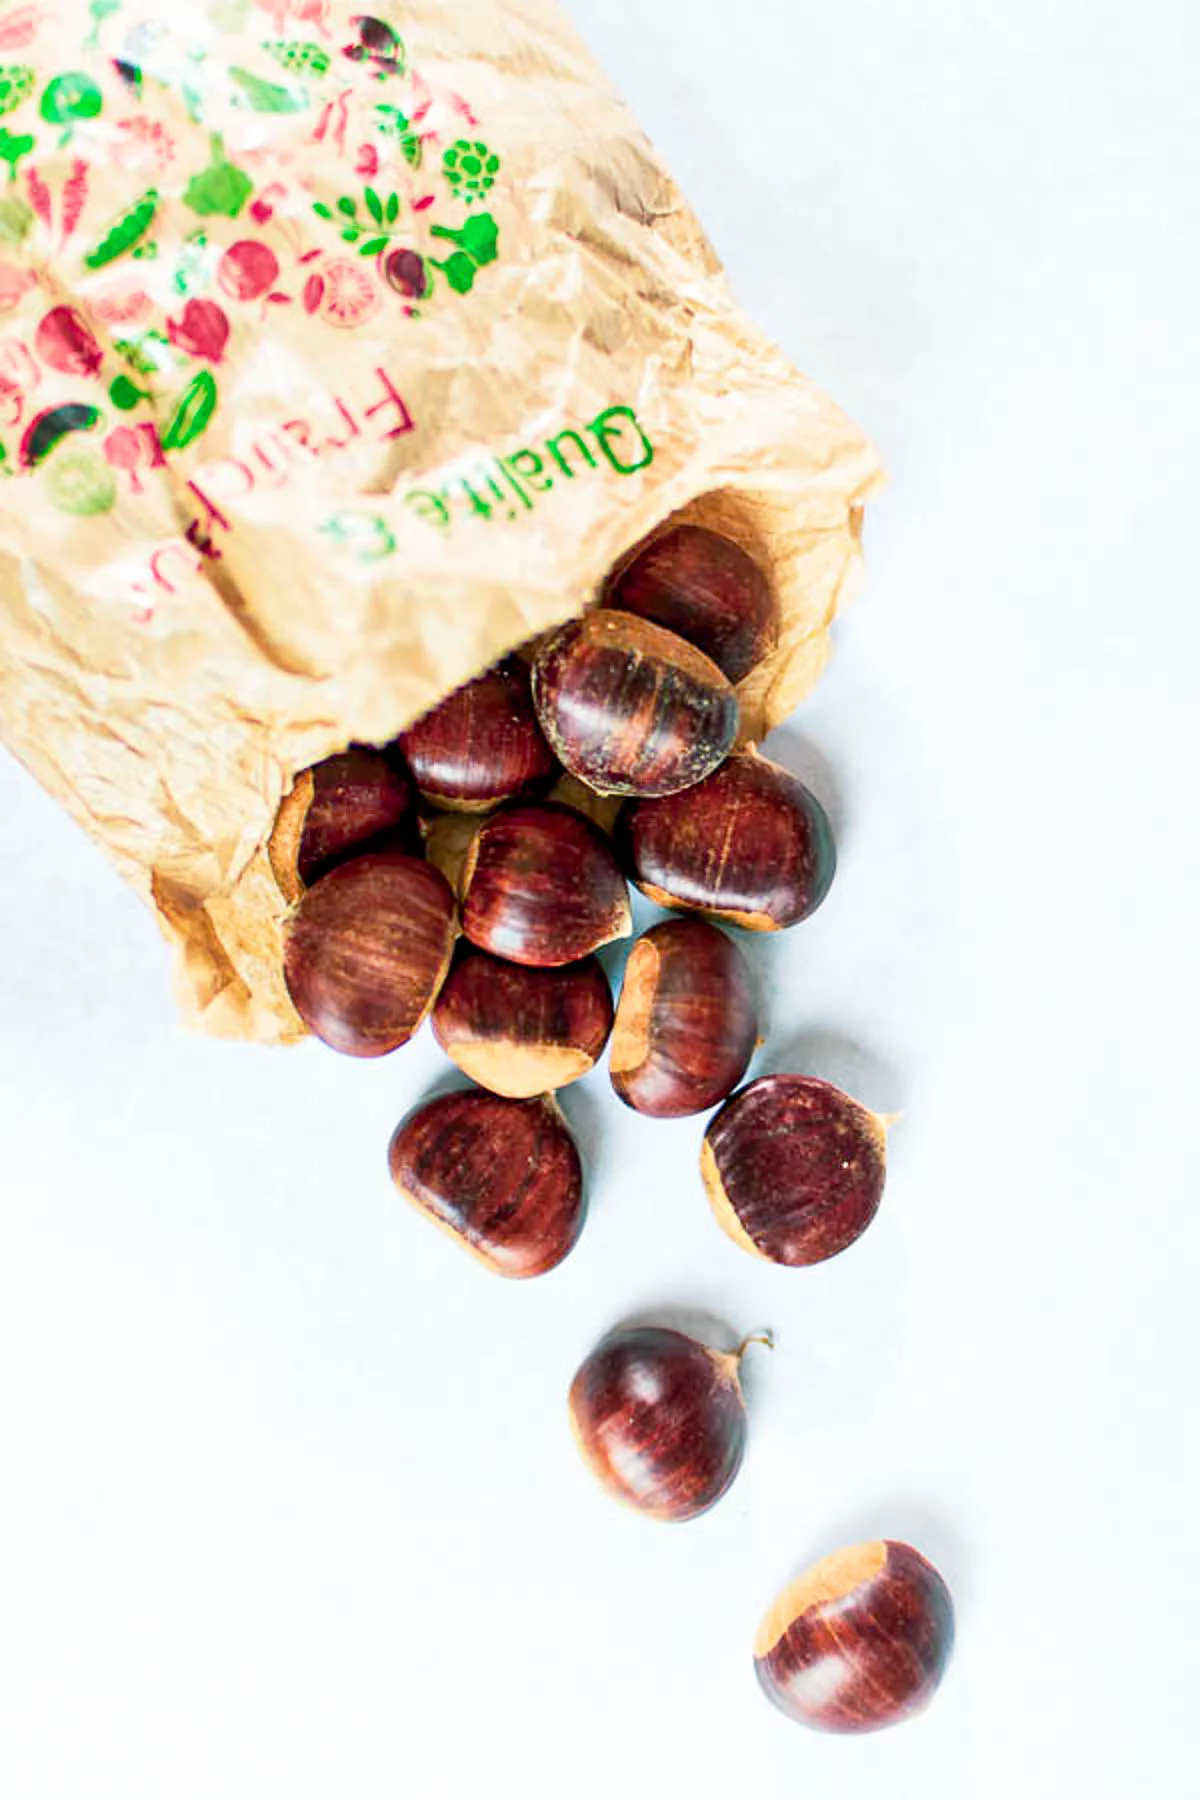 How to cook chestnuts with astringent skin